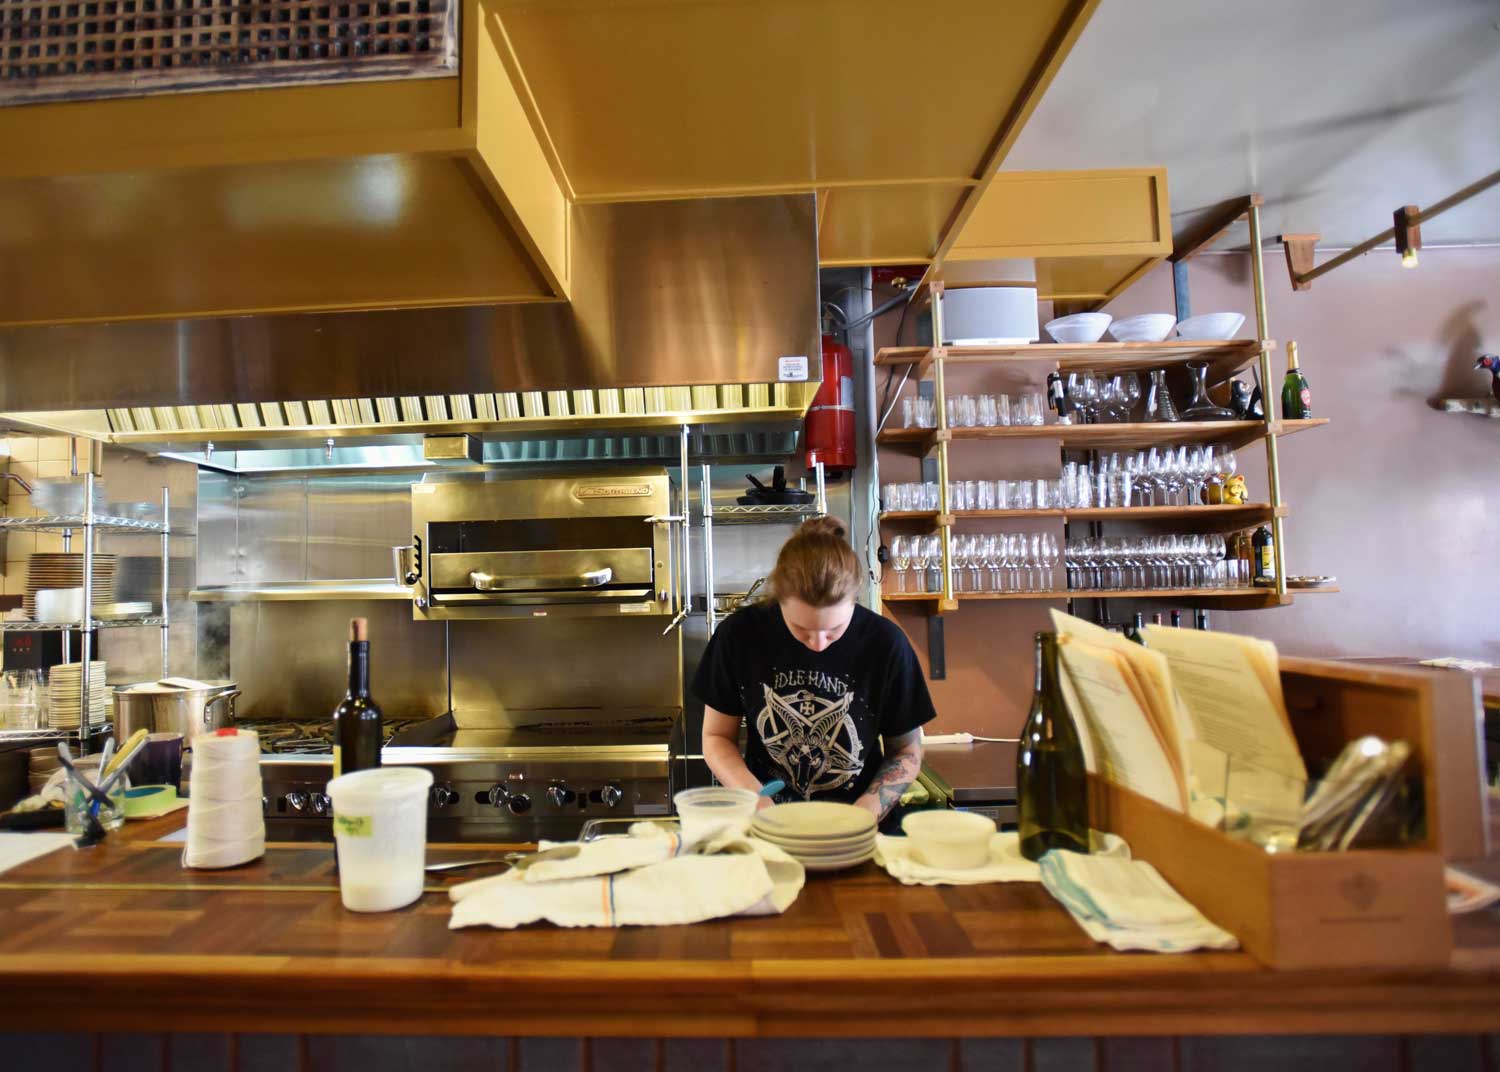 Chef Sara Hauman remains entirely focused on the food and gets into a trance-like state in the kitchen.